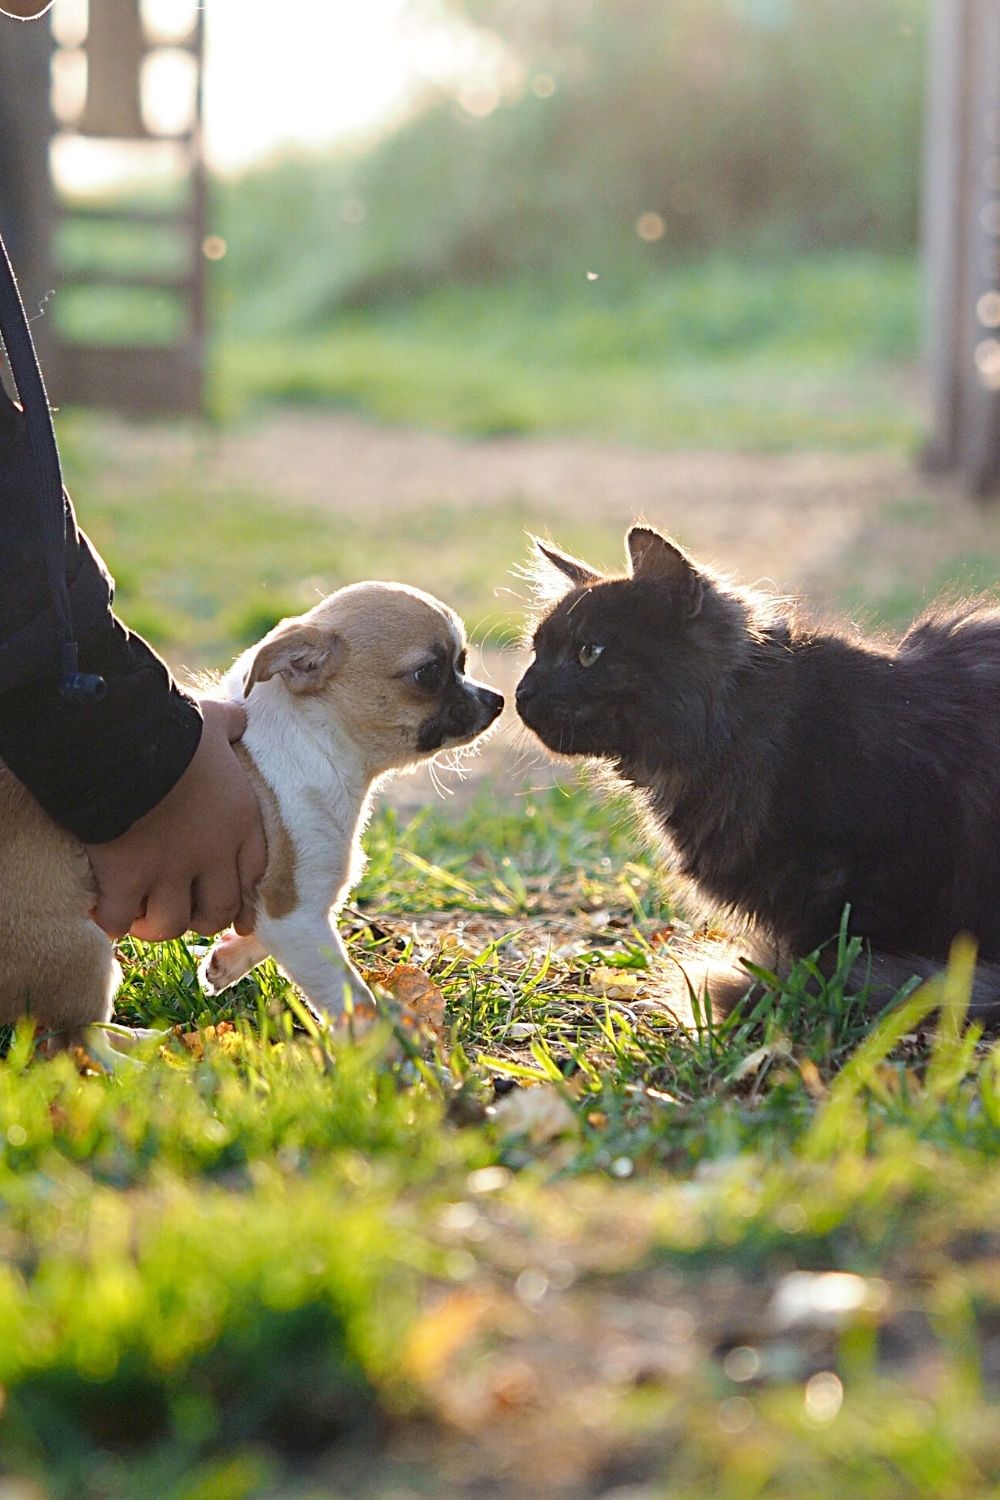 Properly introducing your dog to a cat reduces the chances of the dog becoming aggressive towards the cat